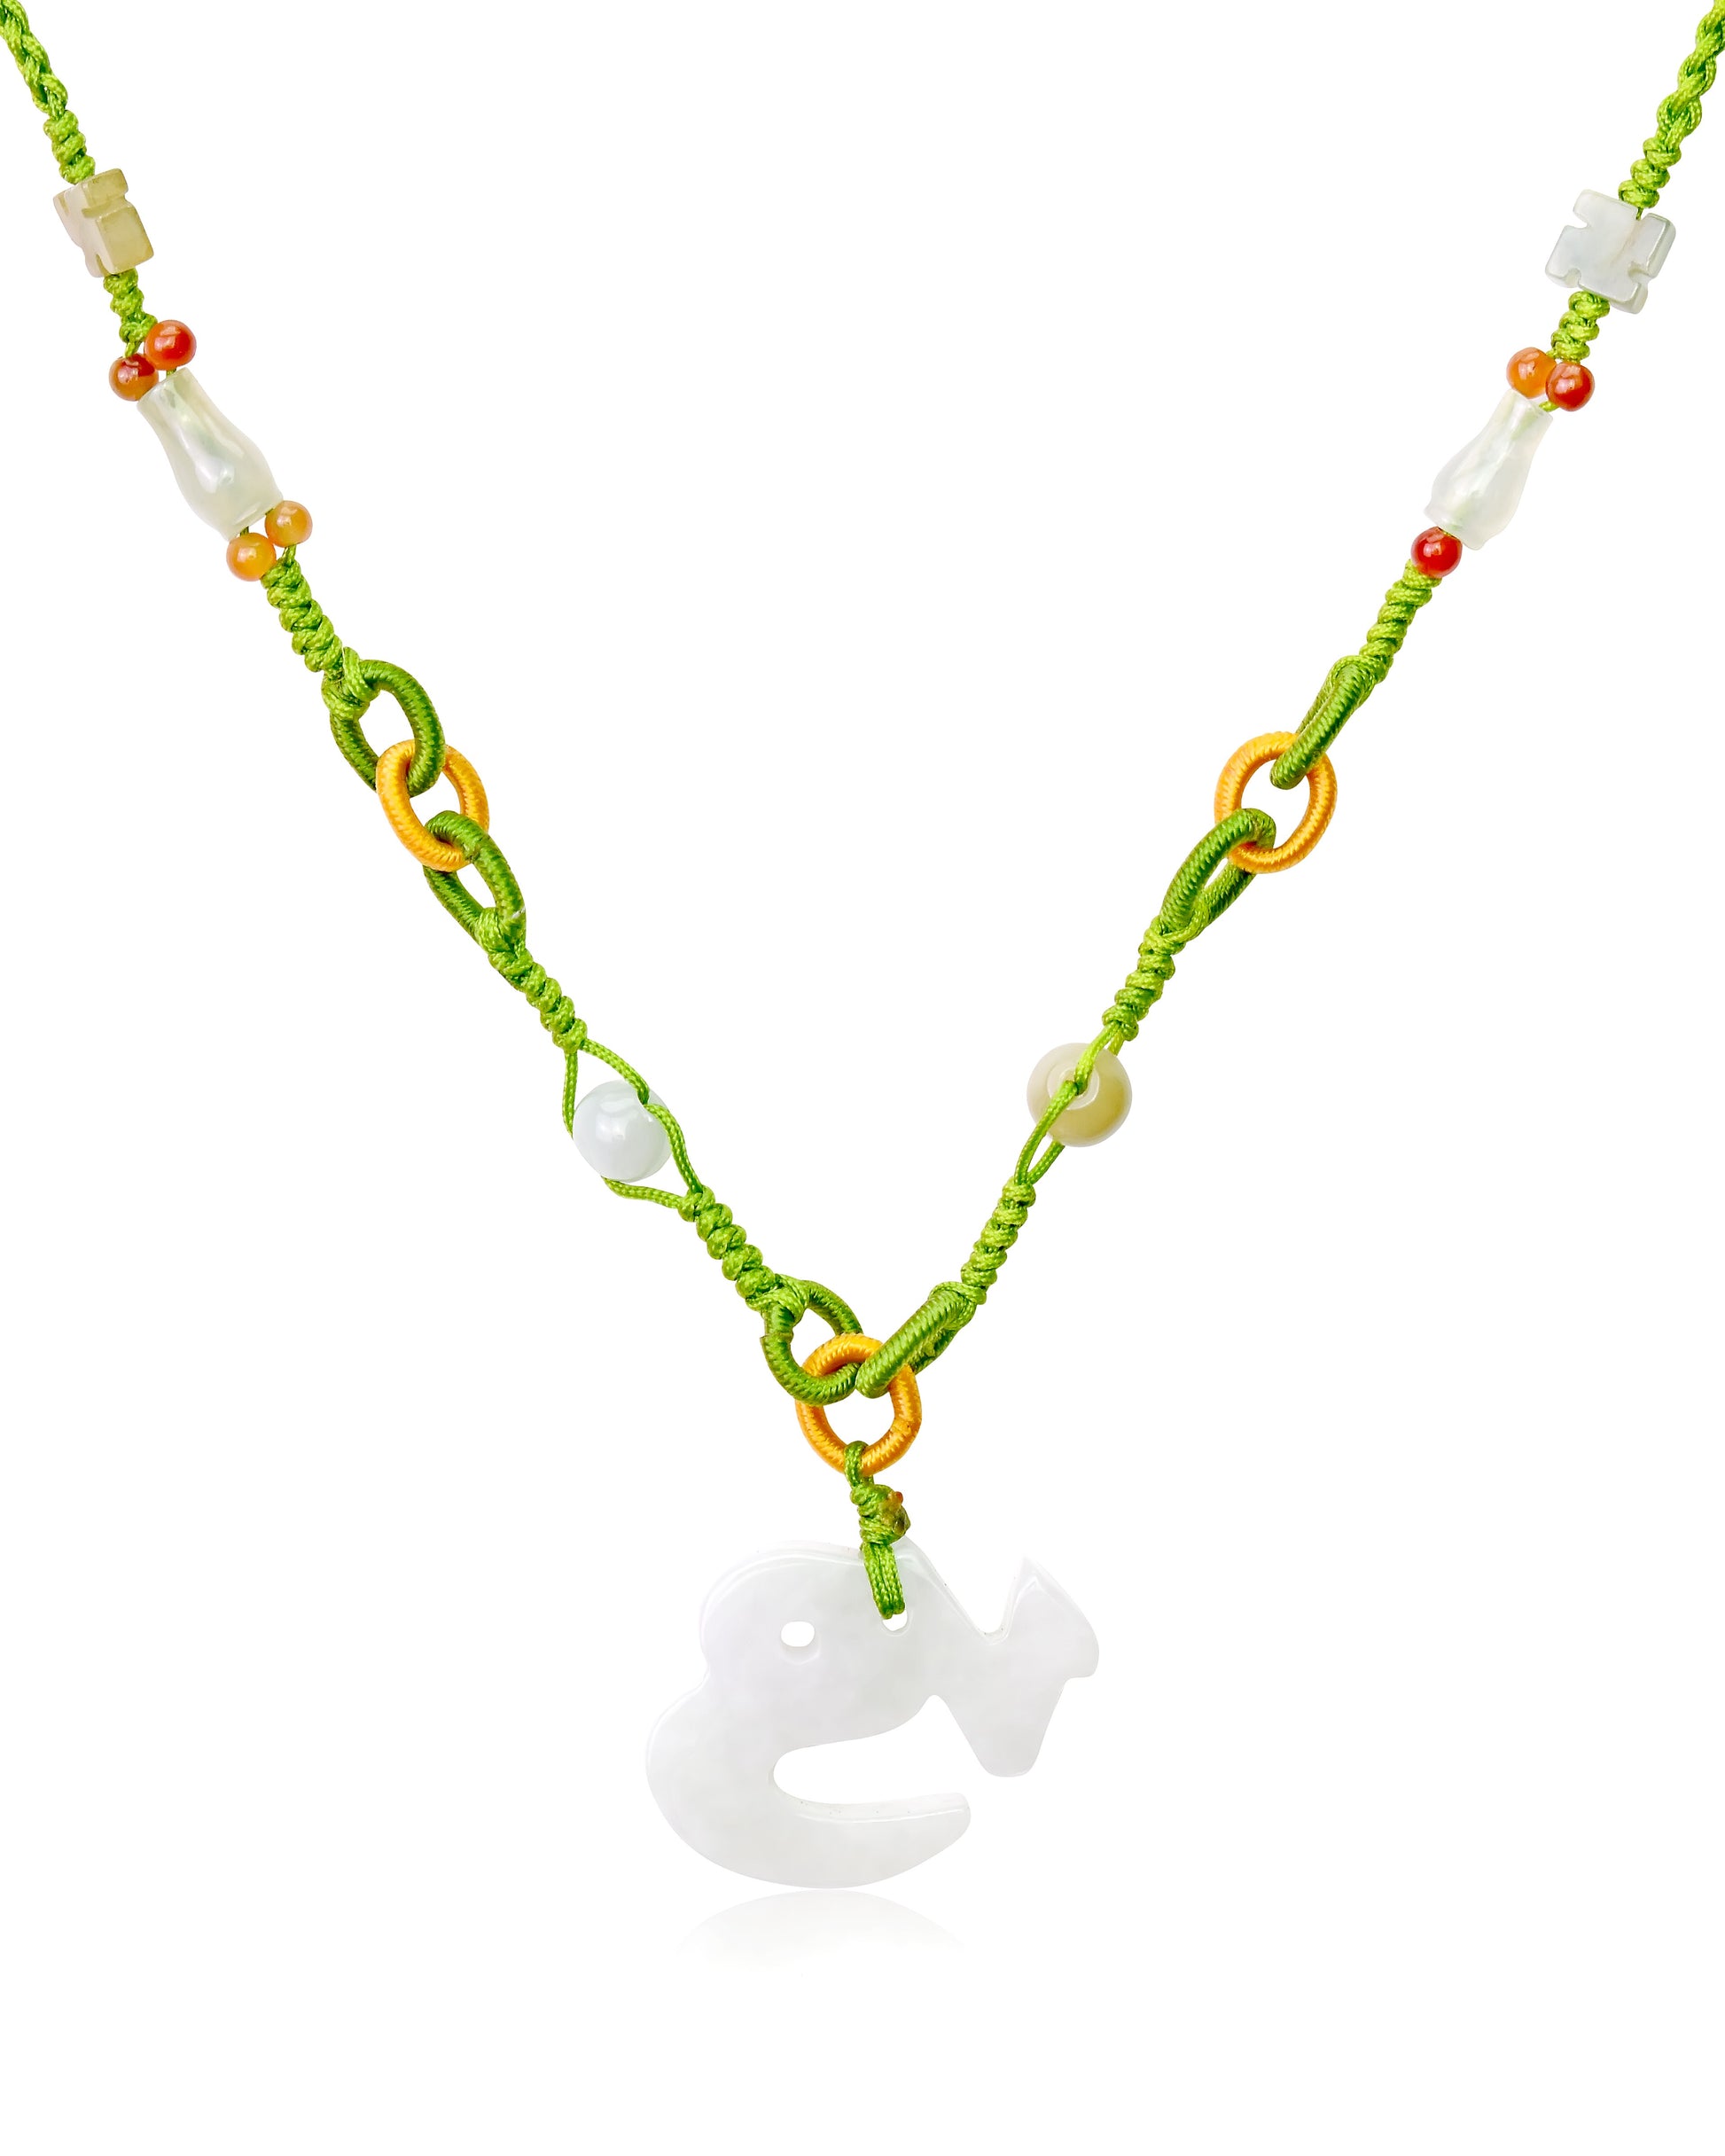 Feel the Love and Passion with a Capricorn Handmade Jade Pendant made with Lime Cord